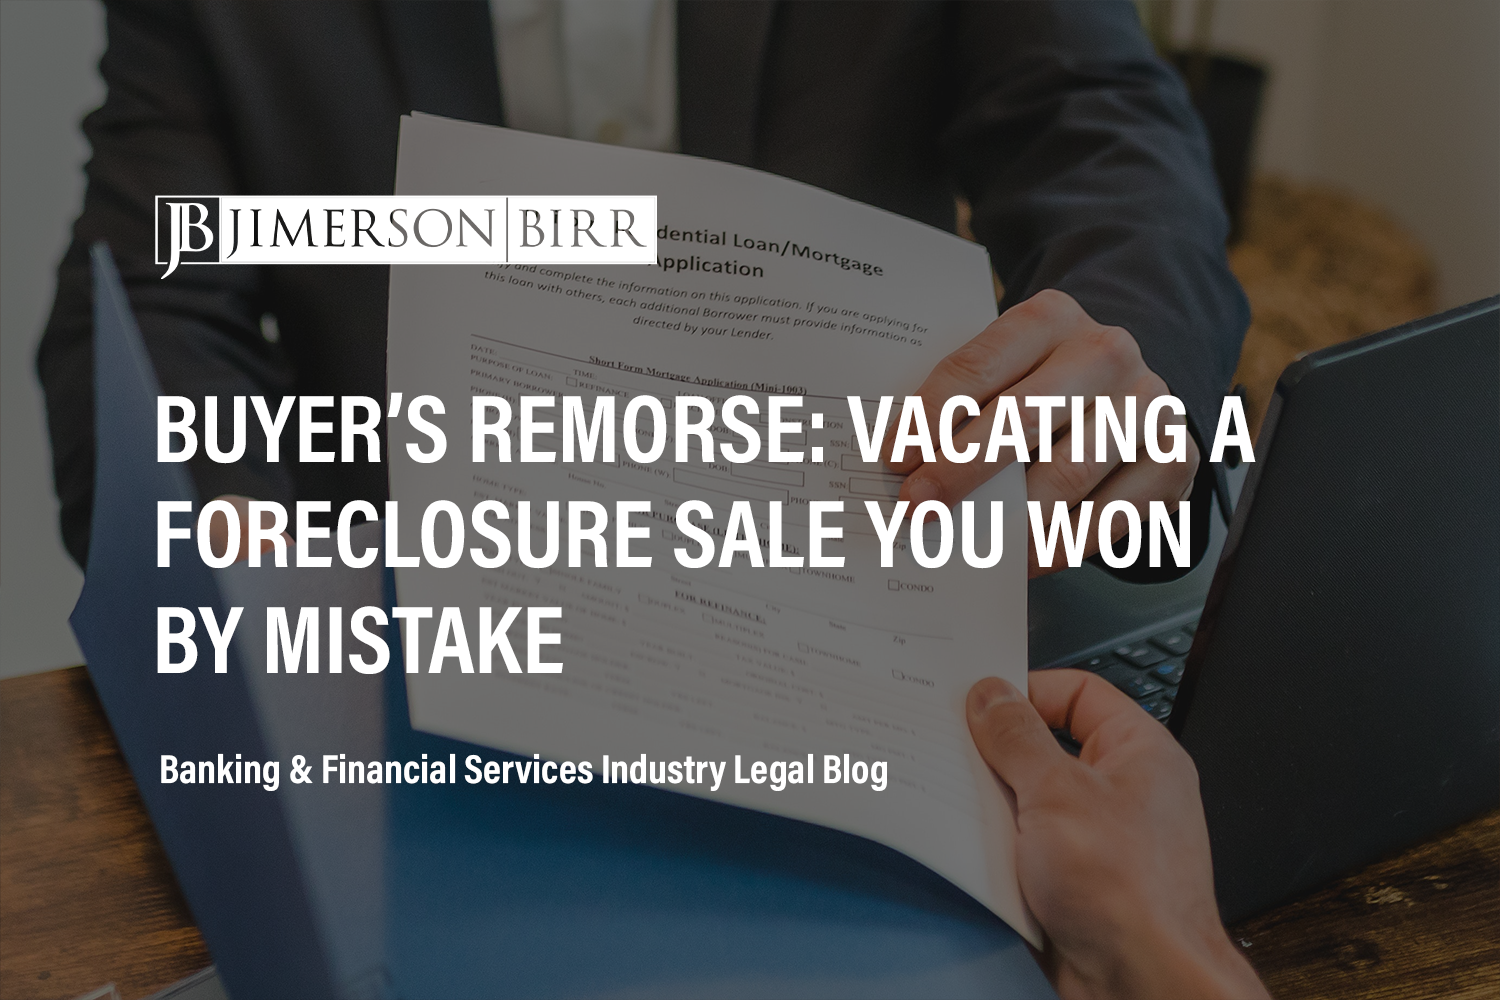 Buyer’s Remorse: Vacating a Foreclosure Sale You Won by Mistake